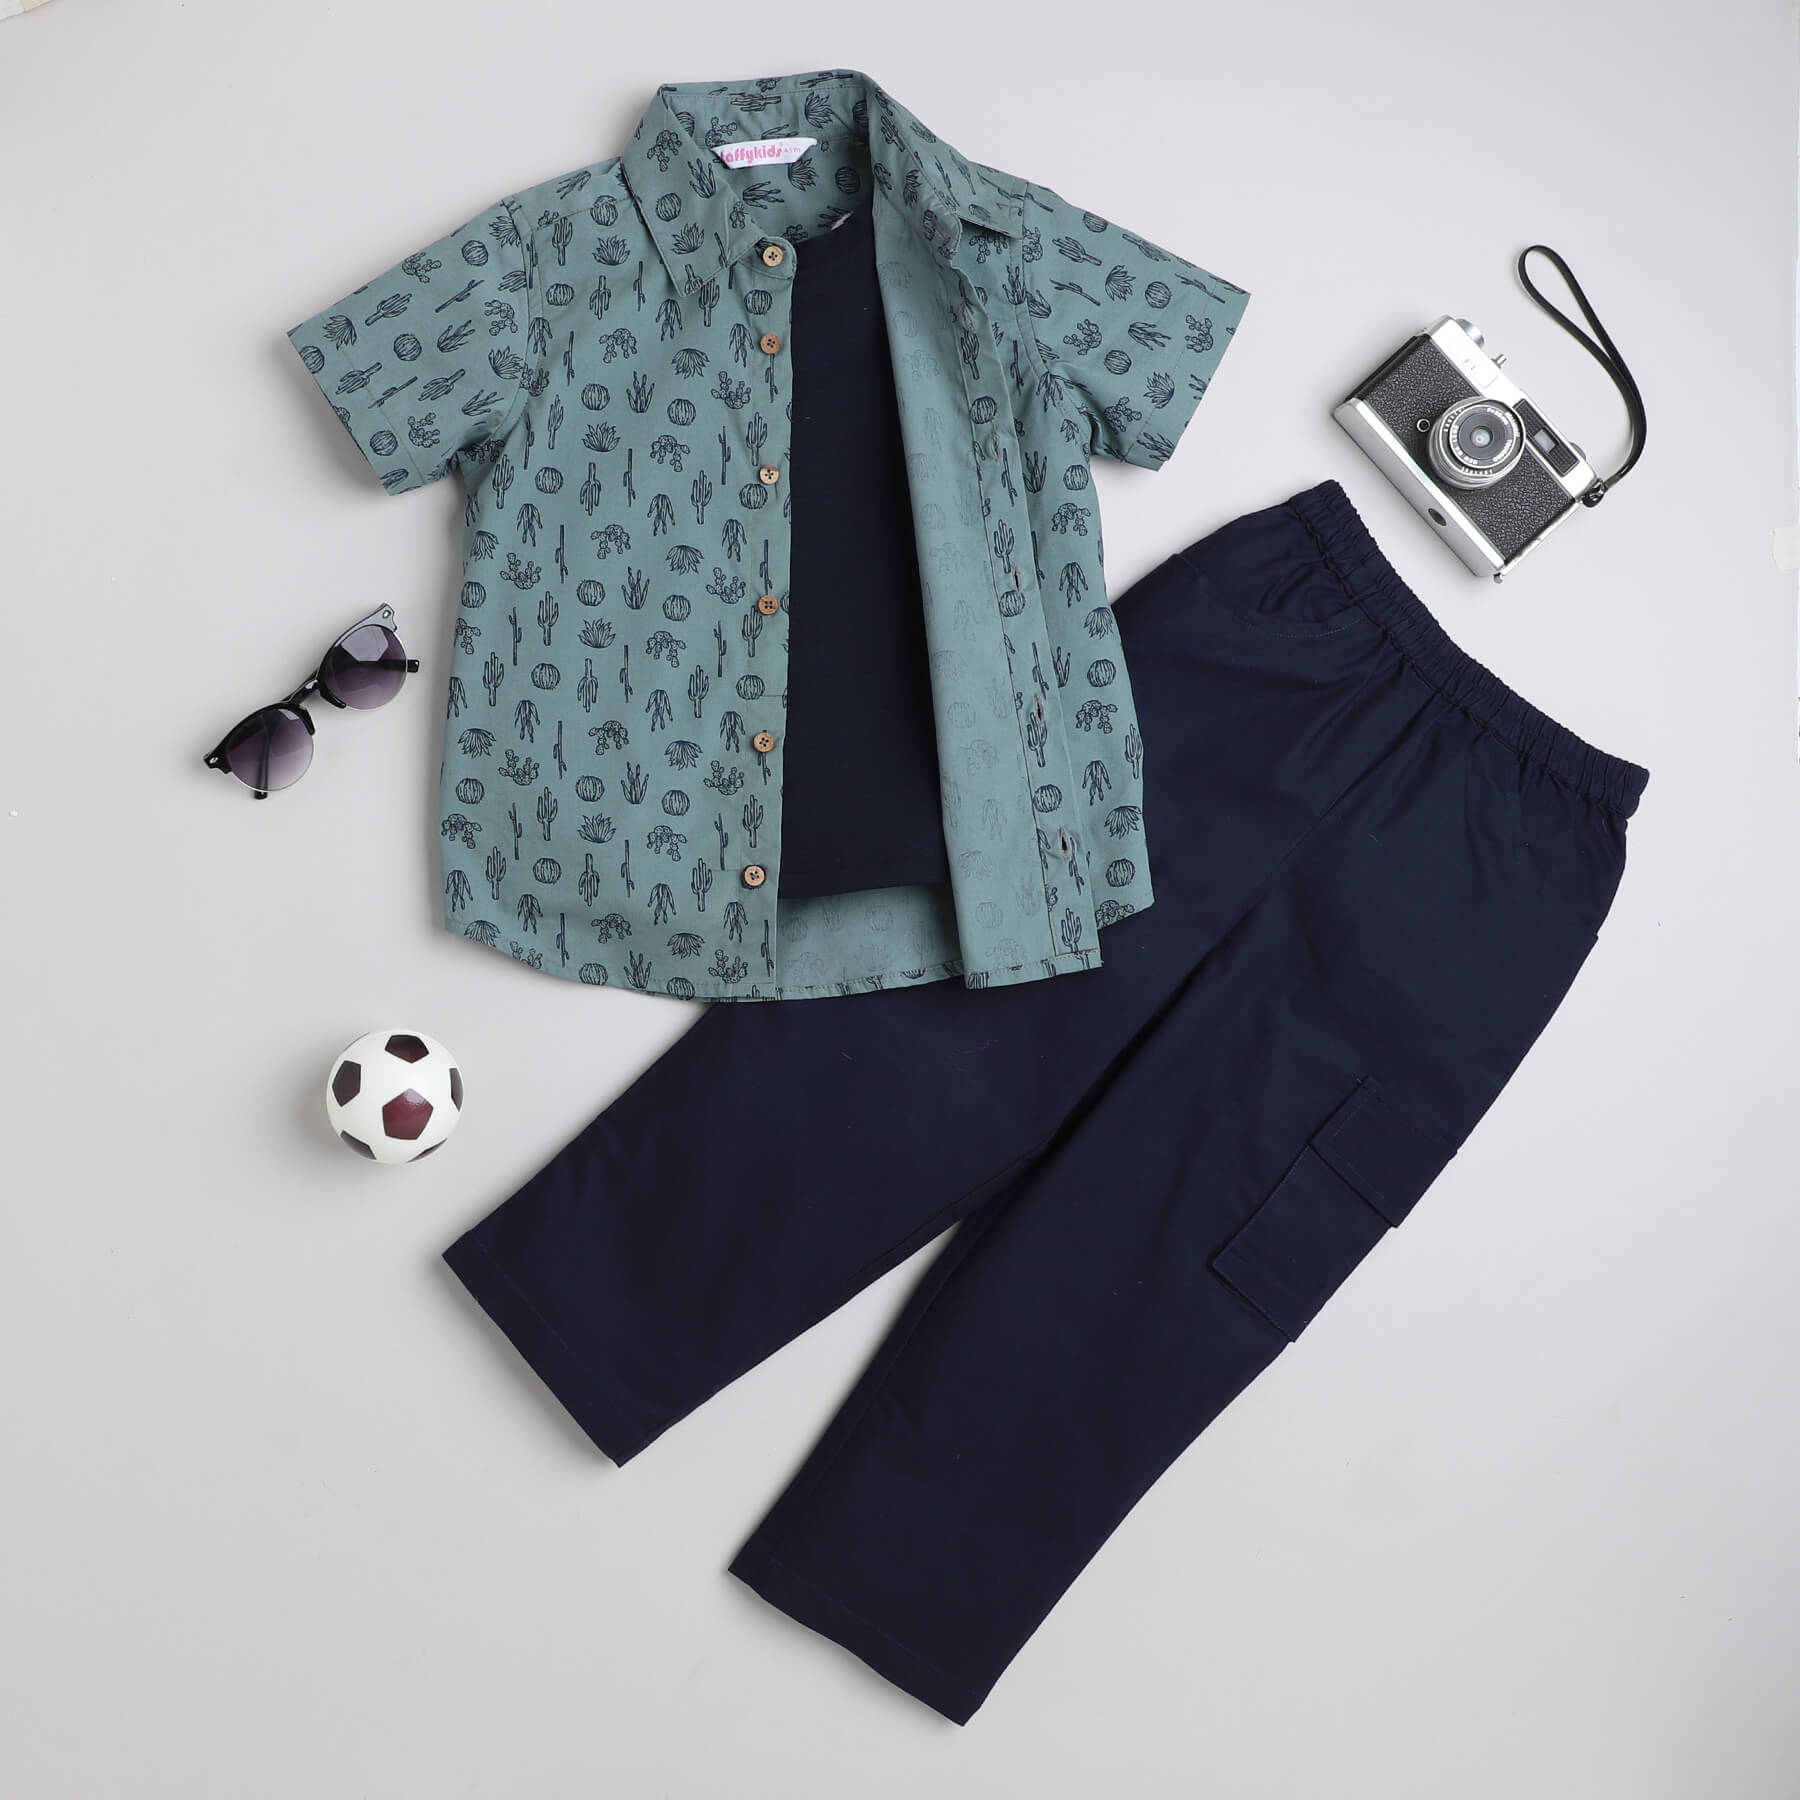 Taffykids Tropical printed half sleeves shirt with attach tee and cargo pant set-Green/Navy